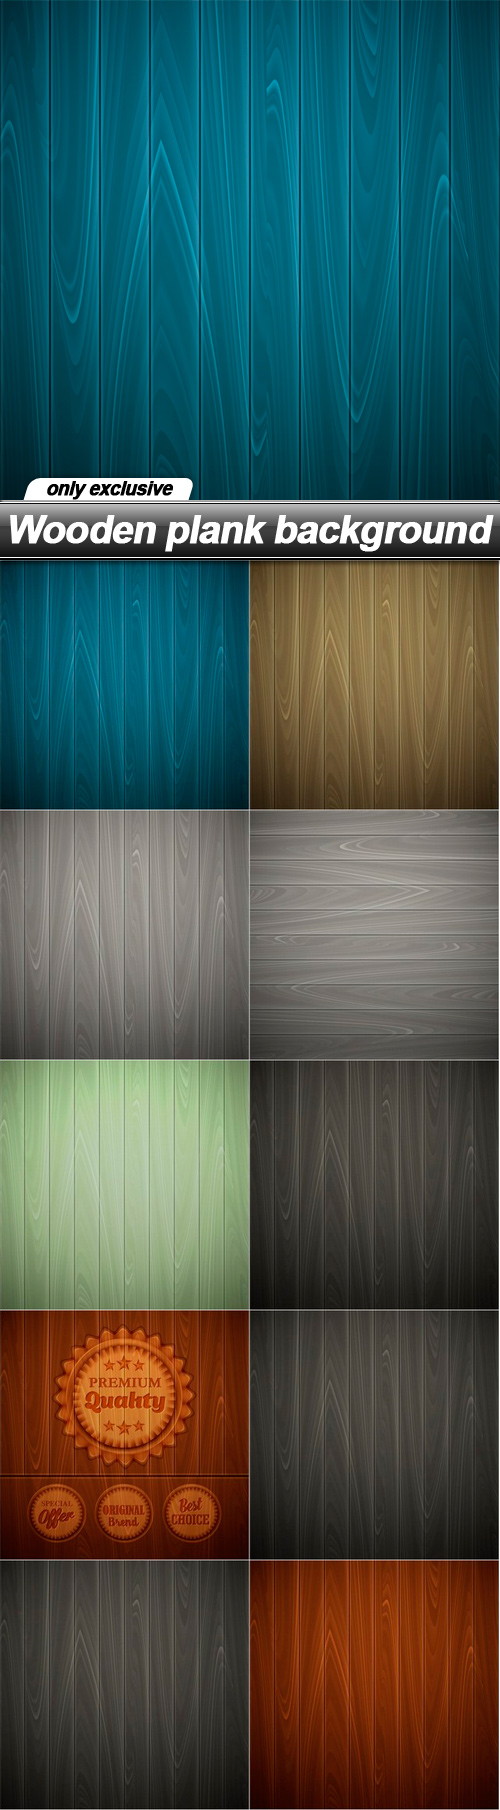 Wooden plank background - 10 EPS